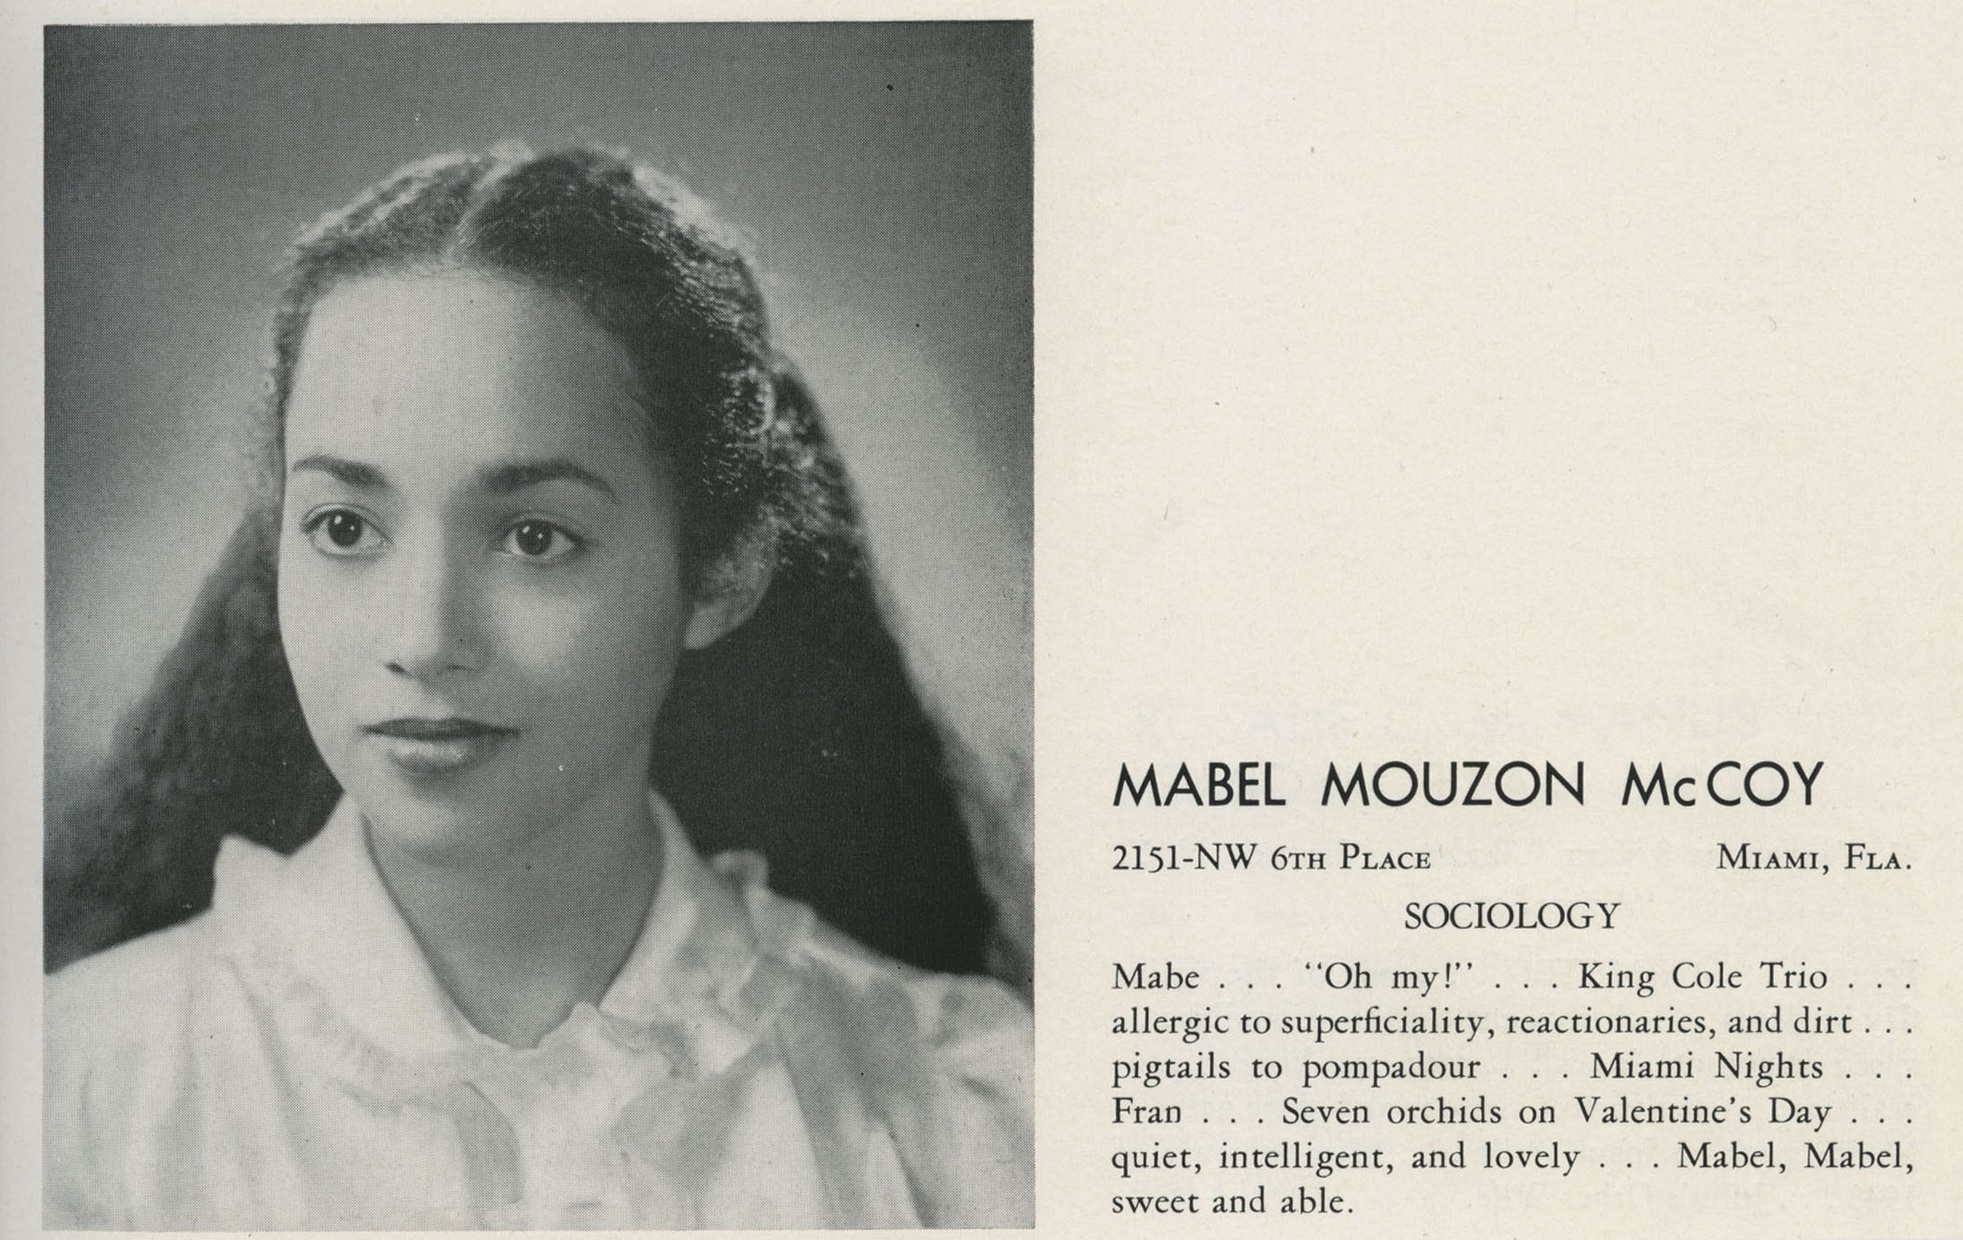 A document features a black and white photograph of a young woman of color in a white blouse with long dark hair. “Mabel Mouzon McCoy” is printed to the image’s right with a Florida address and the word “Sociology” listed.